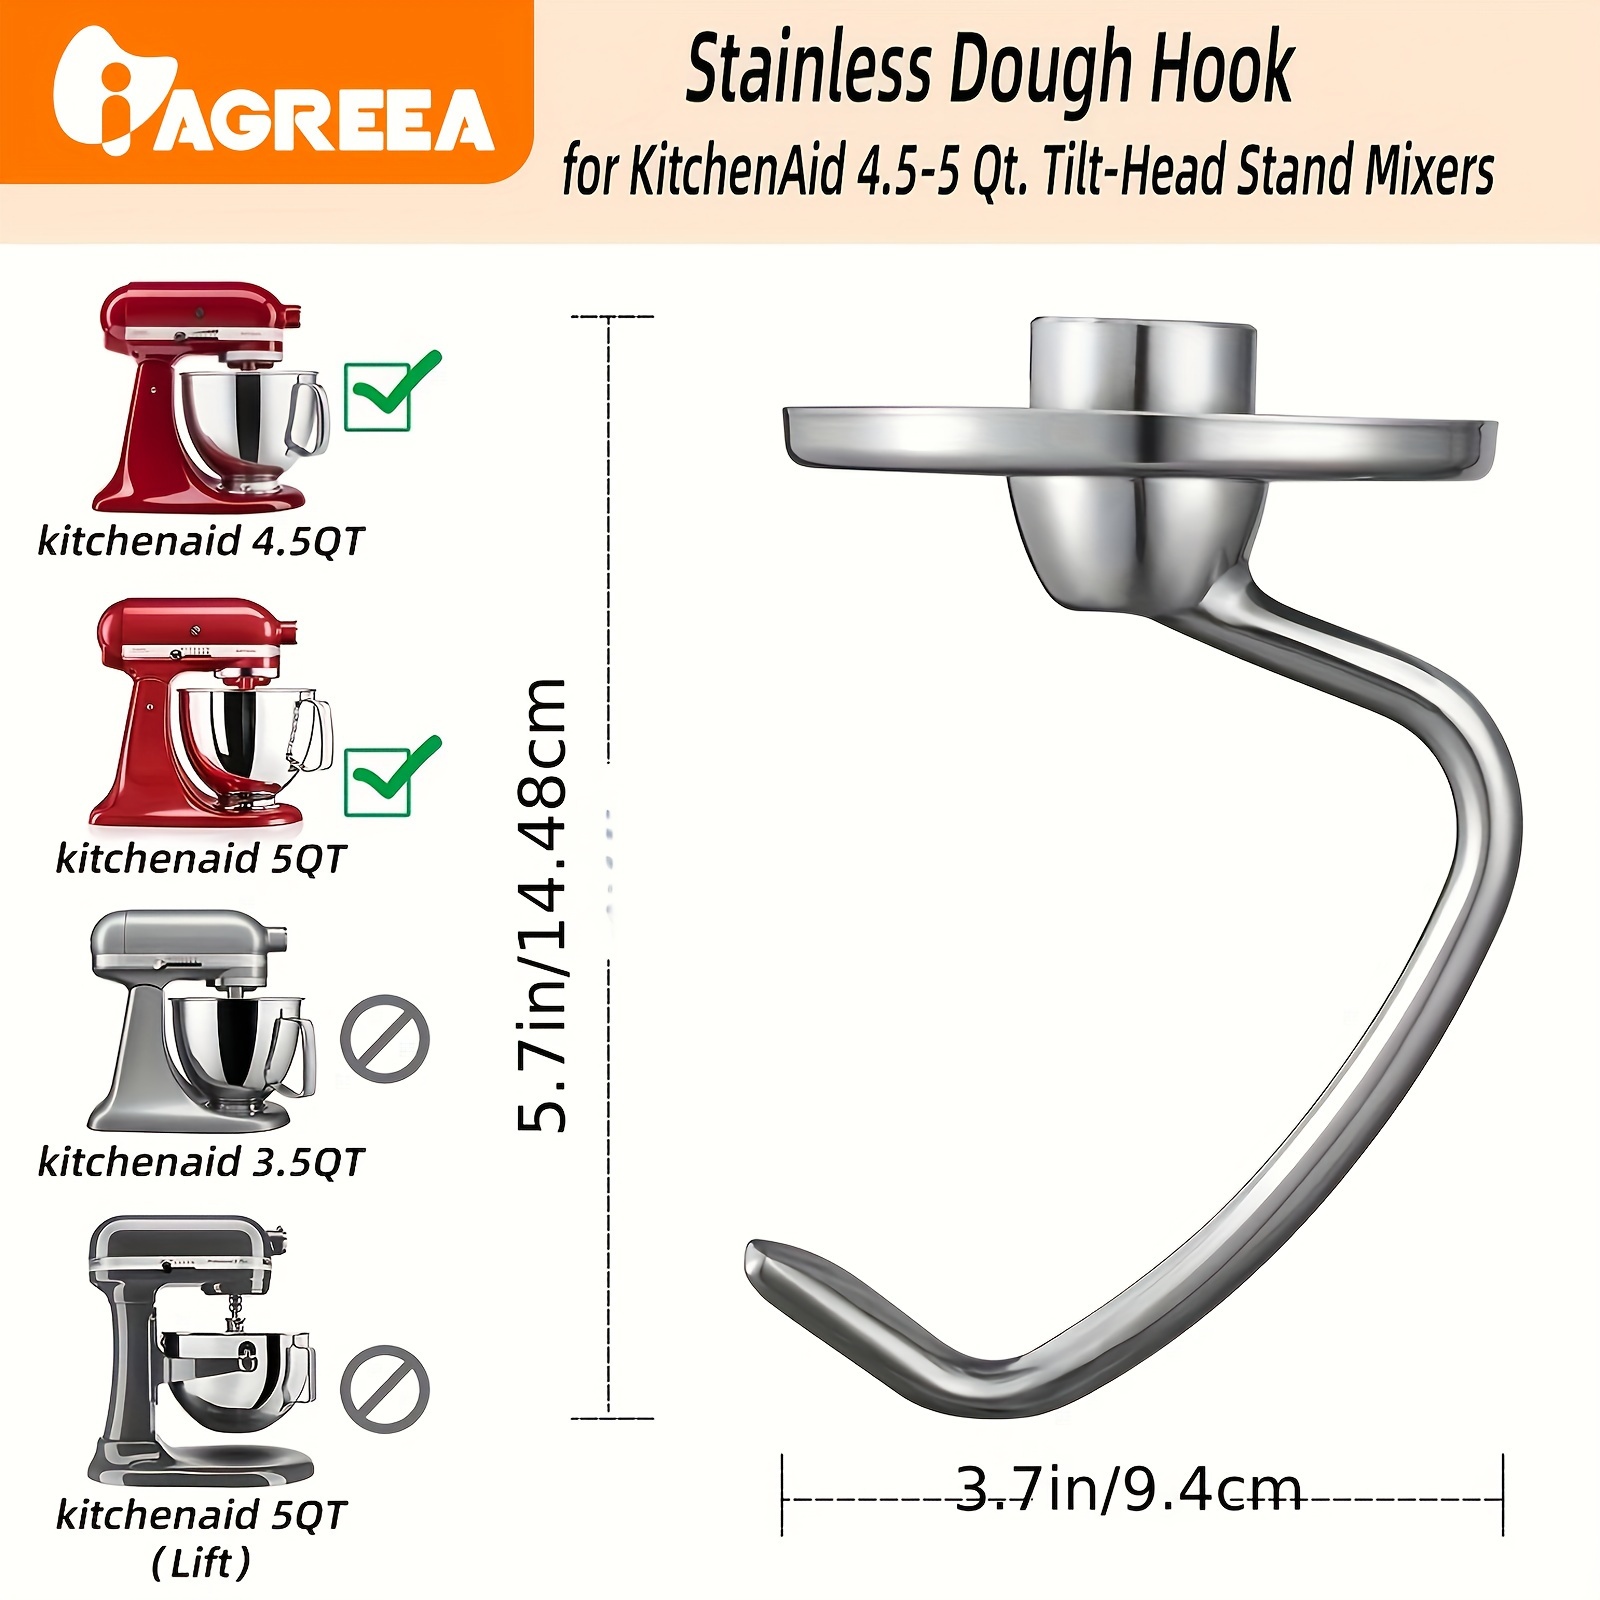 Kitchenaid Stainless Steel Spiral Dough Hook - Rustproof, Easy To